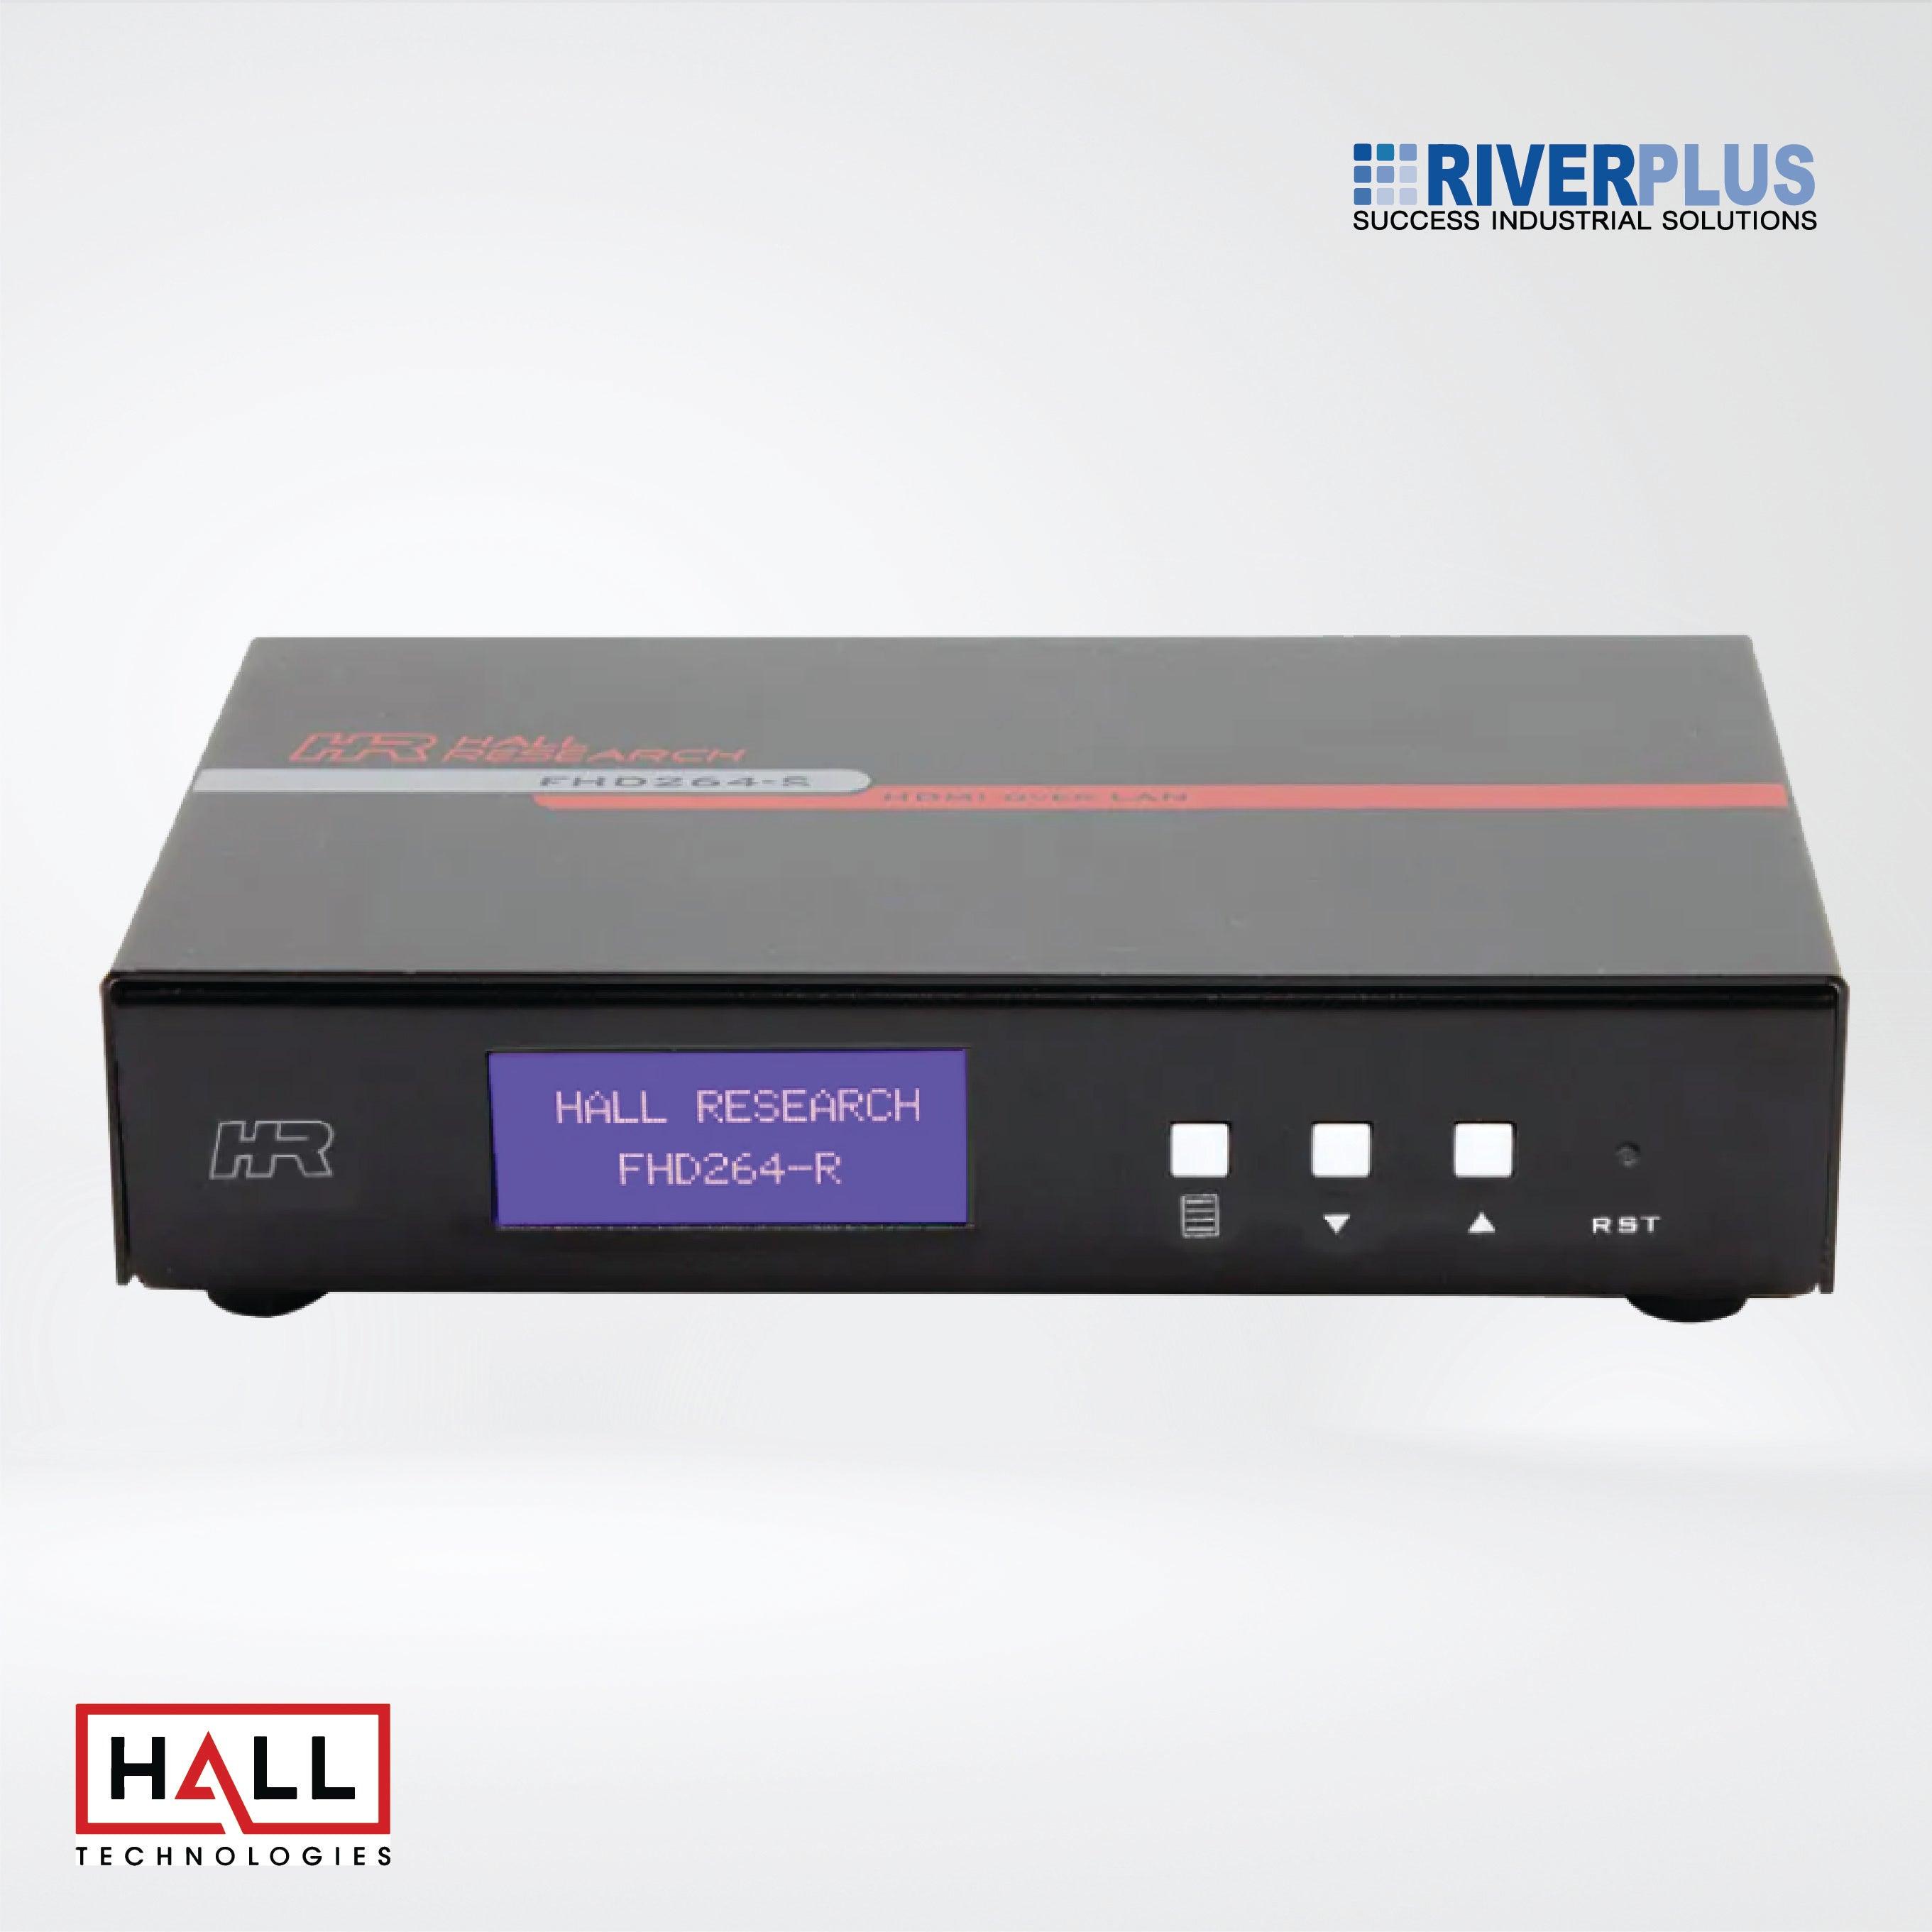 FHD264-R AV and control over IP Receiver with Extracted Audio, RS232 over IP & IR - Riverplus